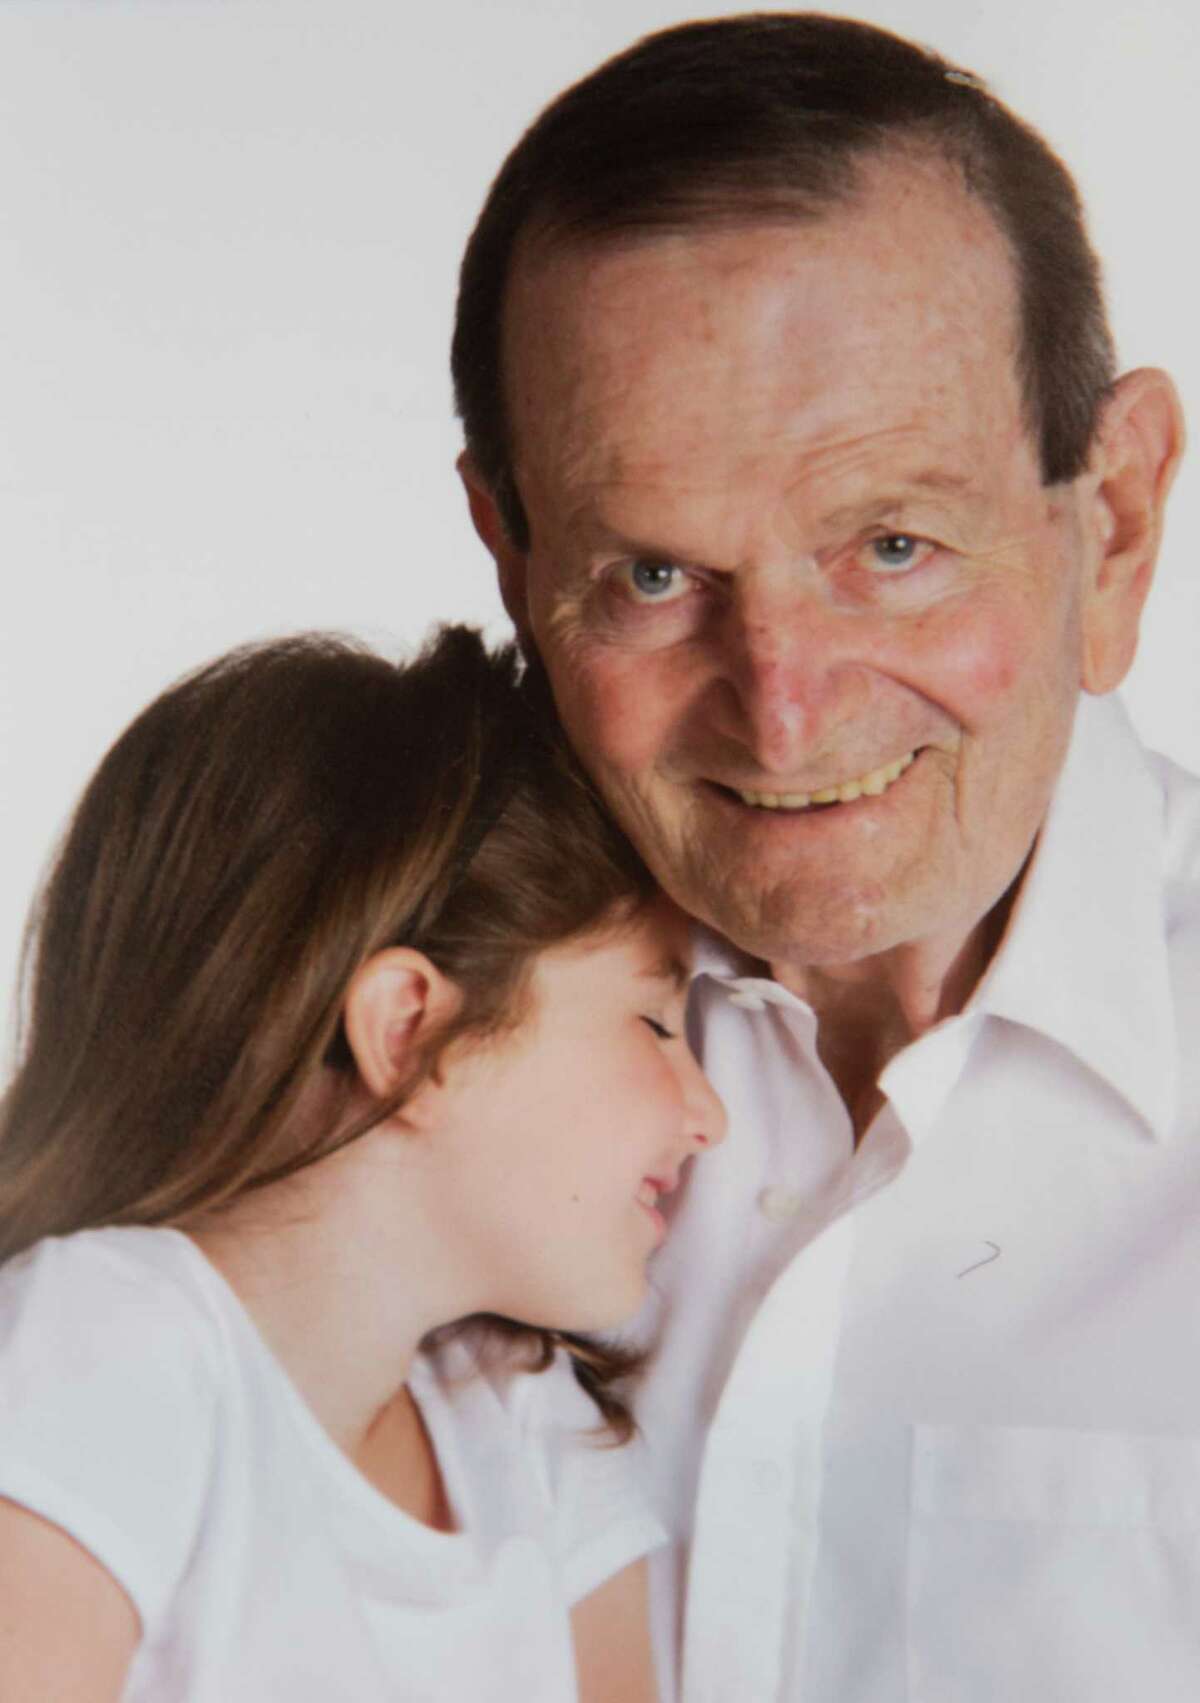 Morton J. Adels had a close relationship with his granddaughter Zoey.